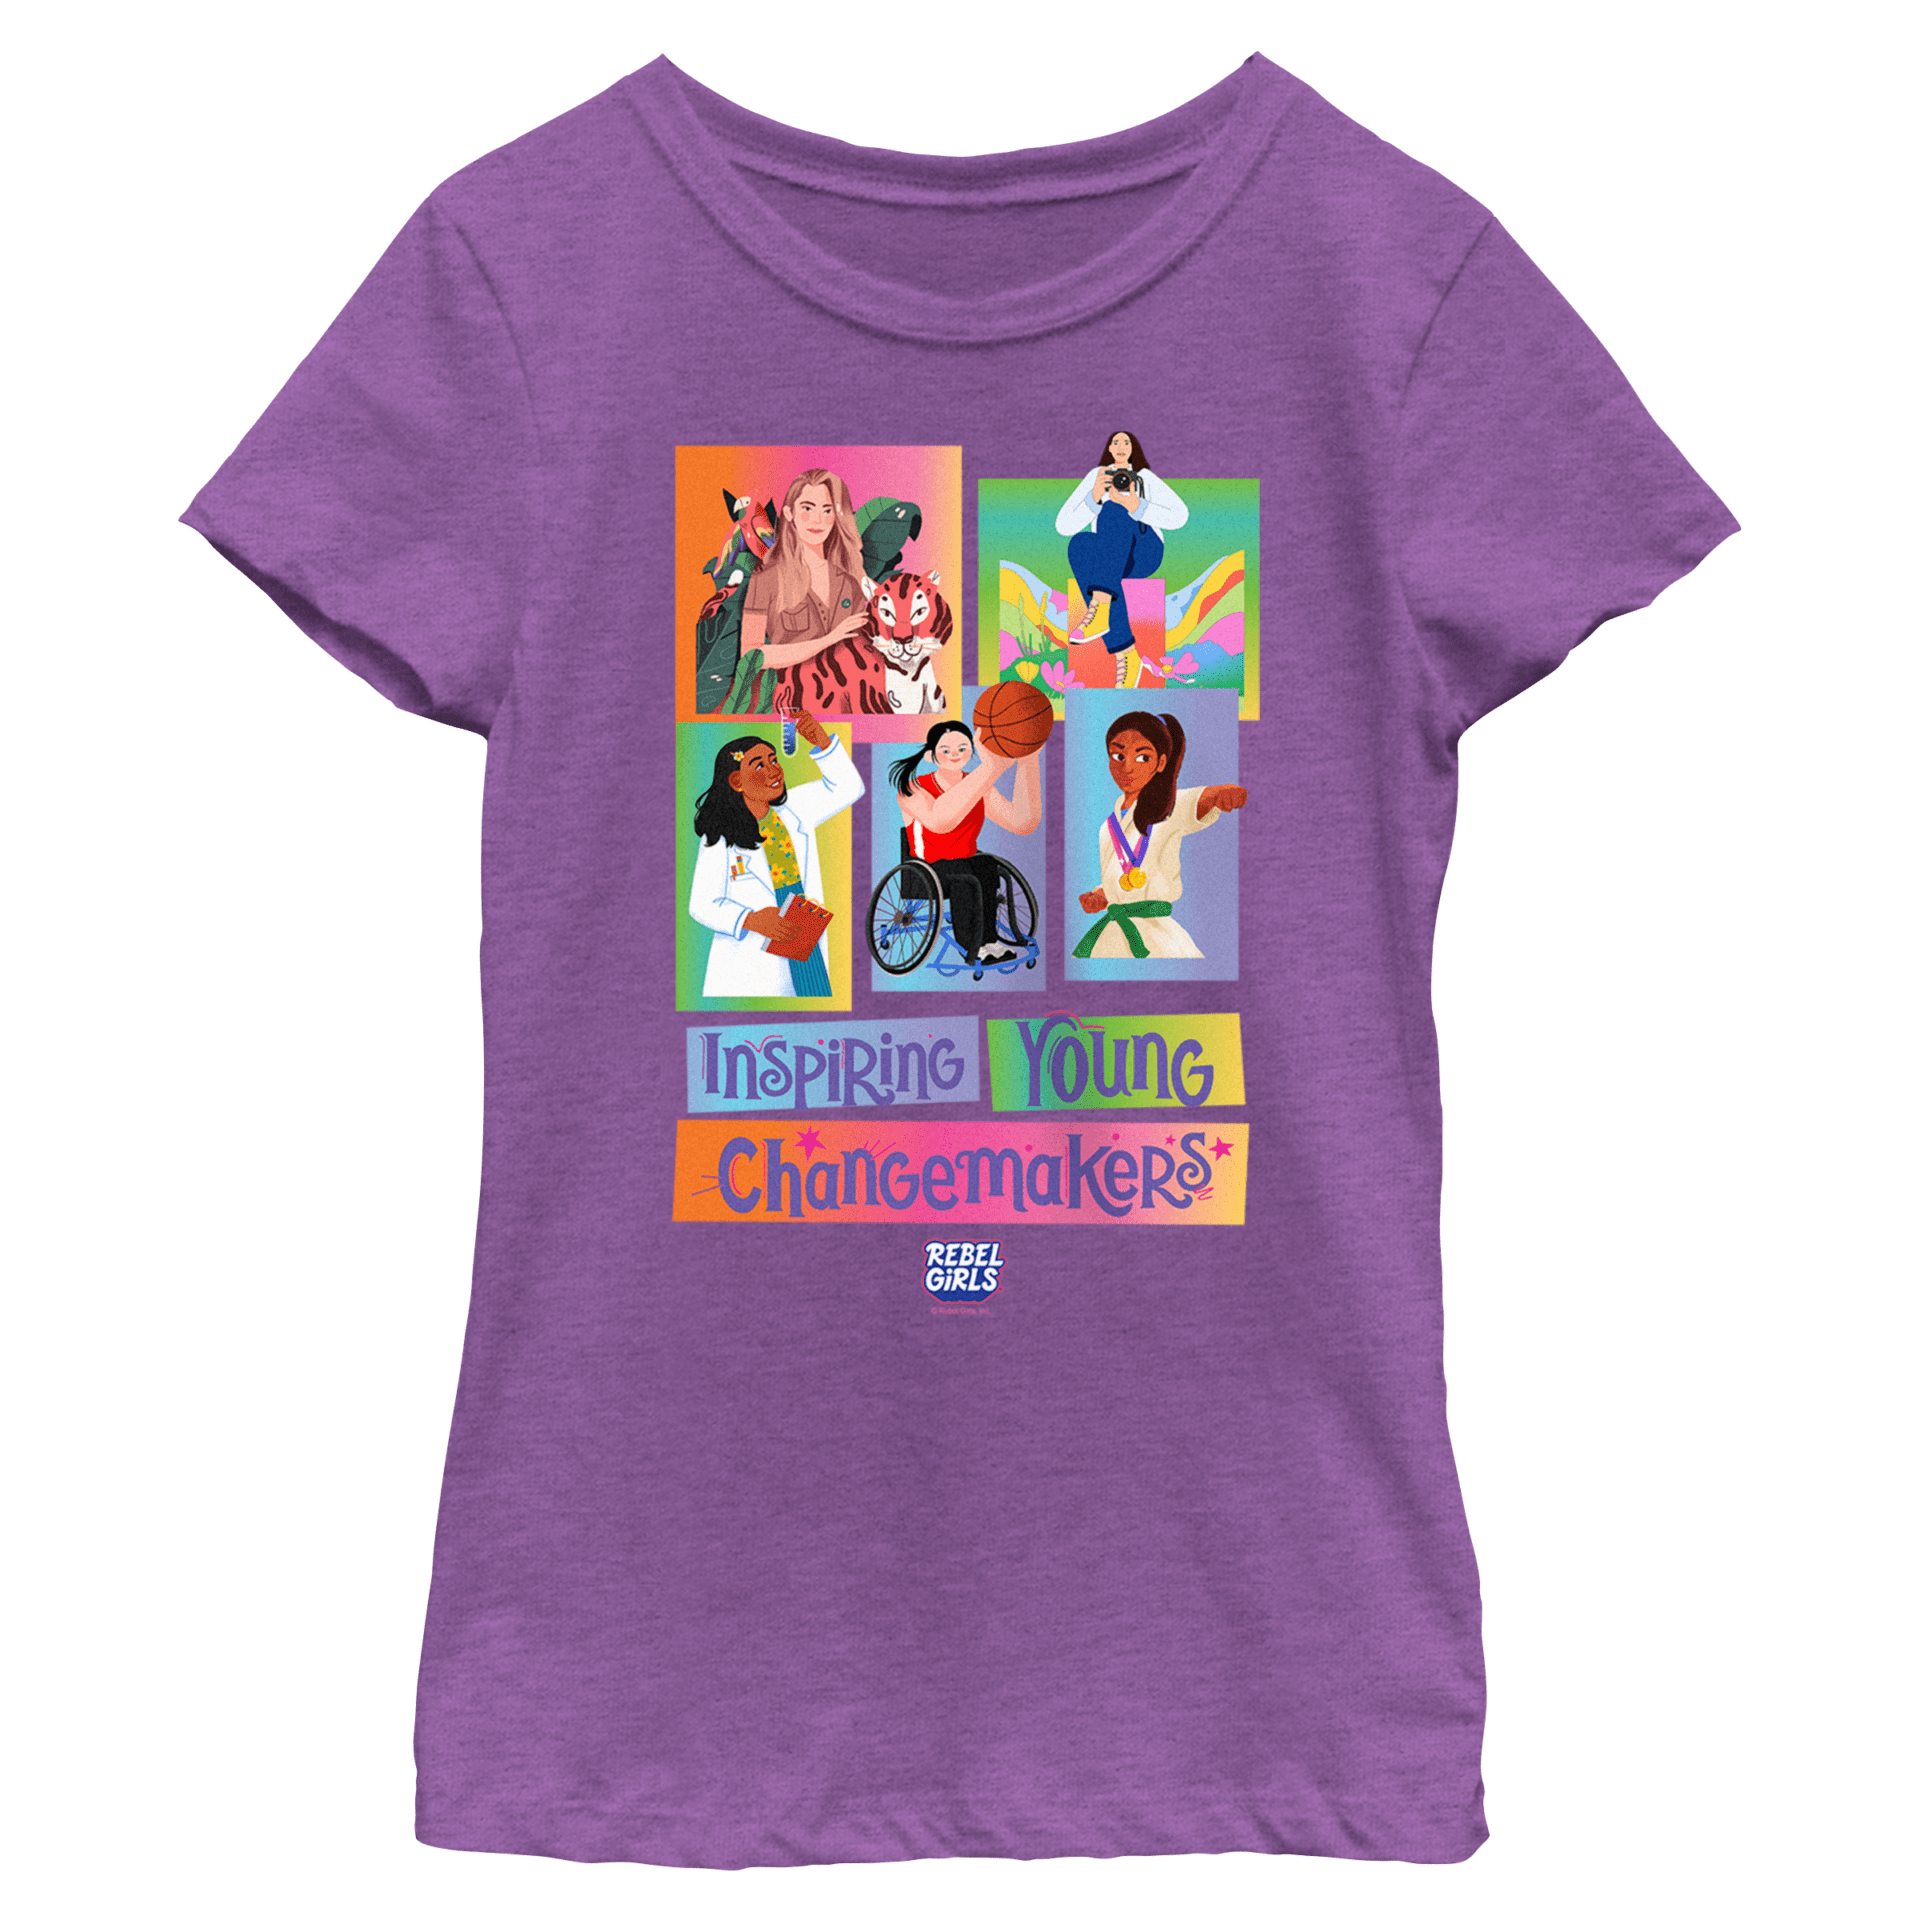 &#8220;Inspiring Young Changemakers&#8221; Tees and Tops